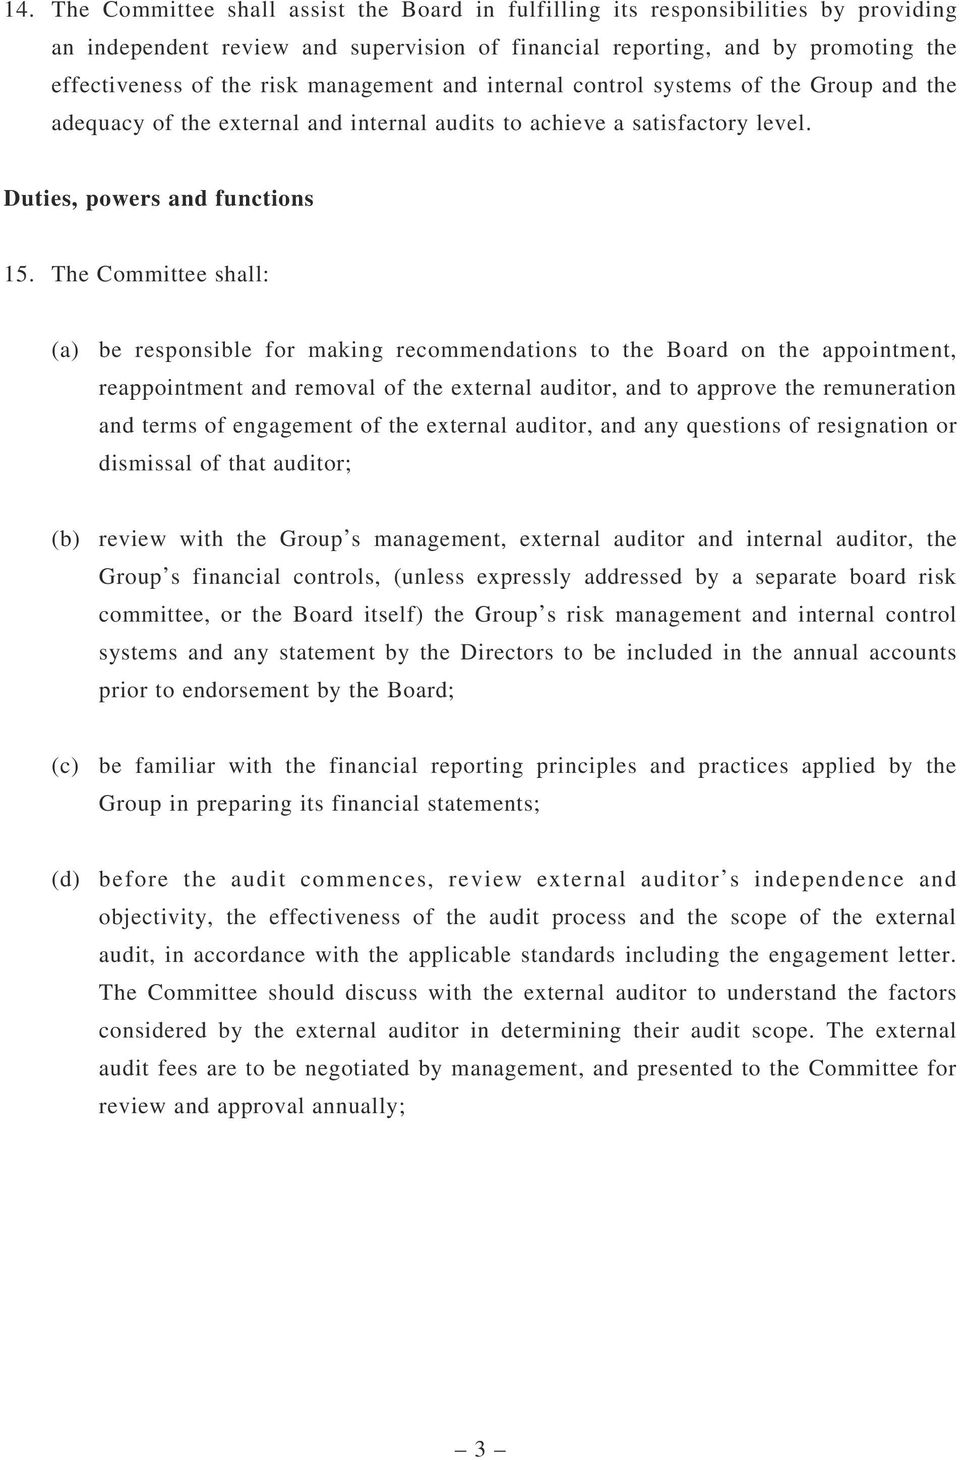 The Committee shall: (a) be responsible for making recommendations to the Board on the appointment, reappointment and removal of the external auditor, and to approve the remuneration and terms of